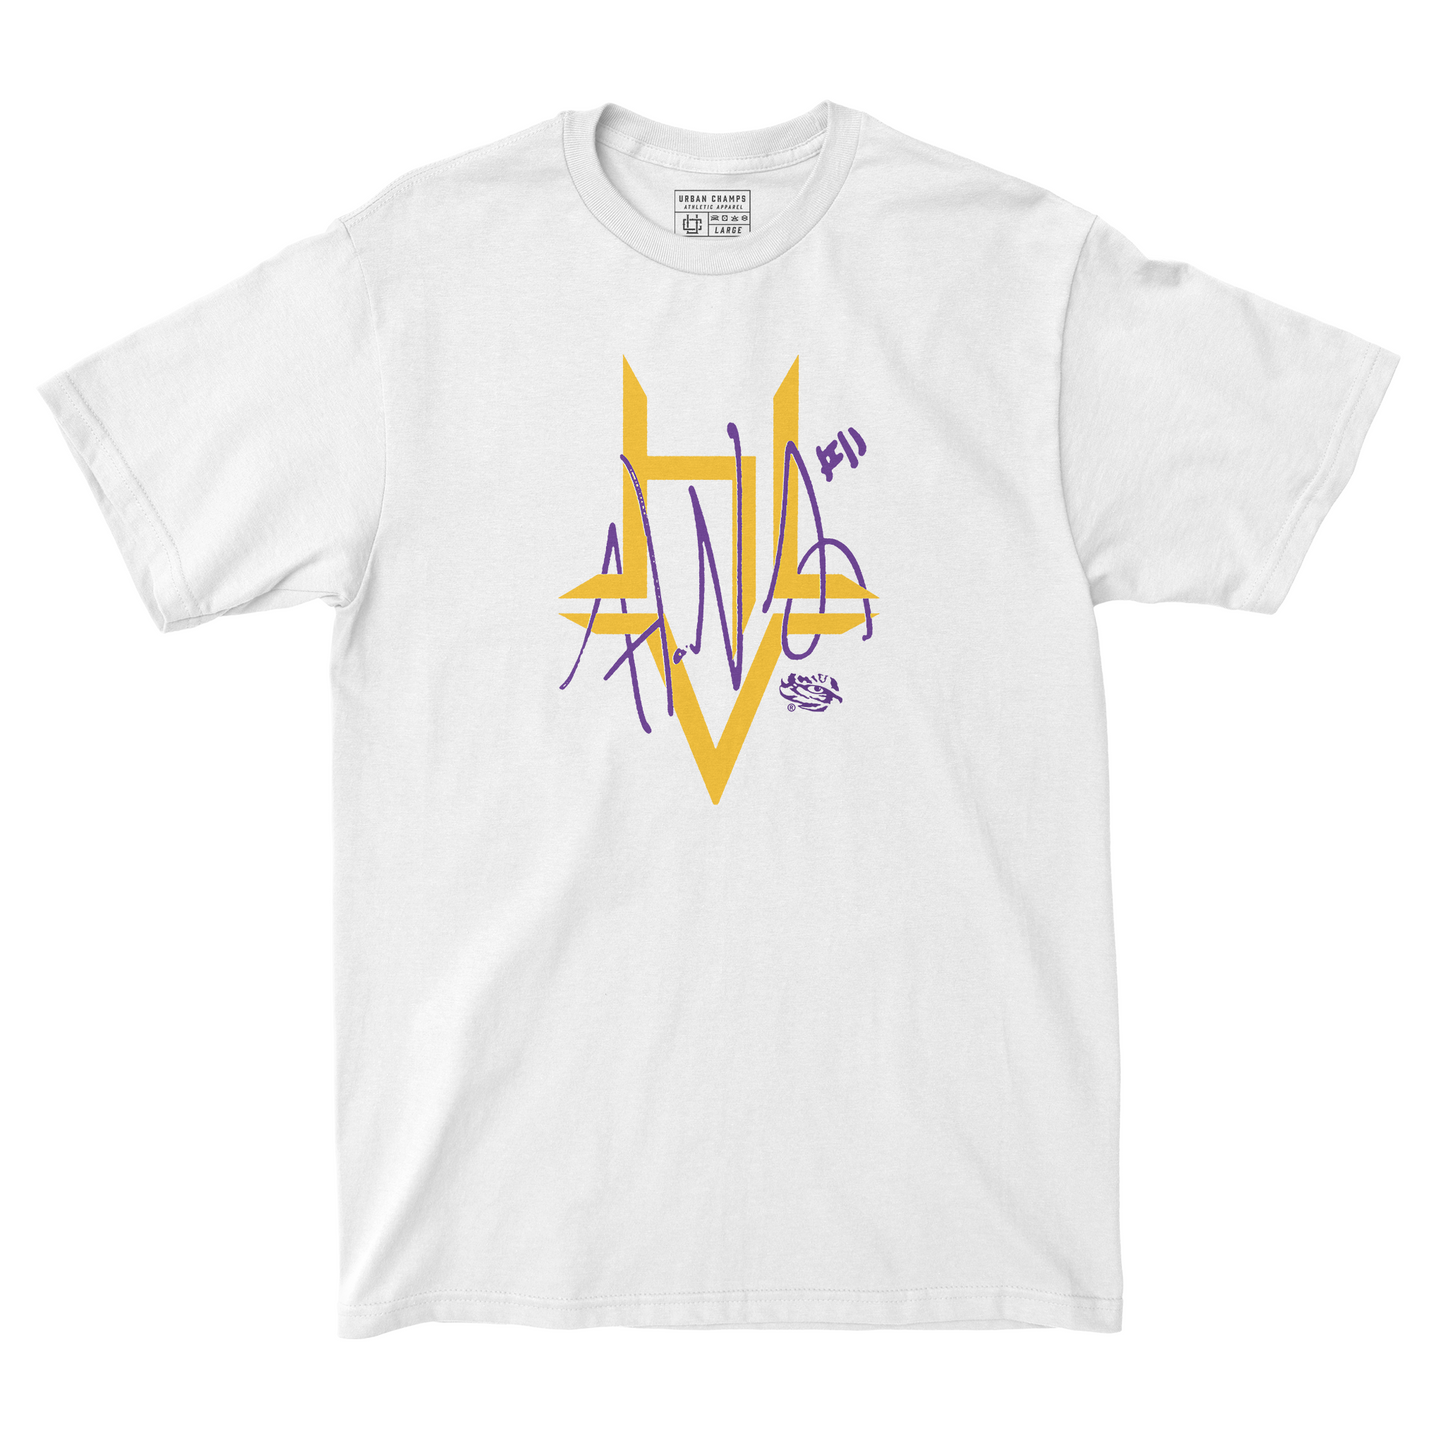 EXCLUSIVE RELEASE: Hailey Van Lith - Woven Logo Comfort Colors White Tee